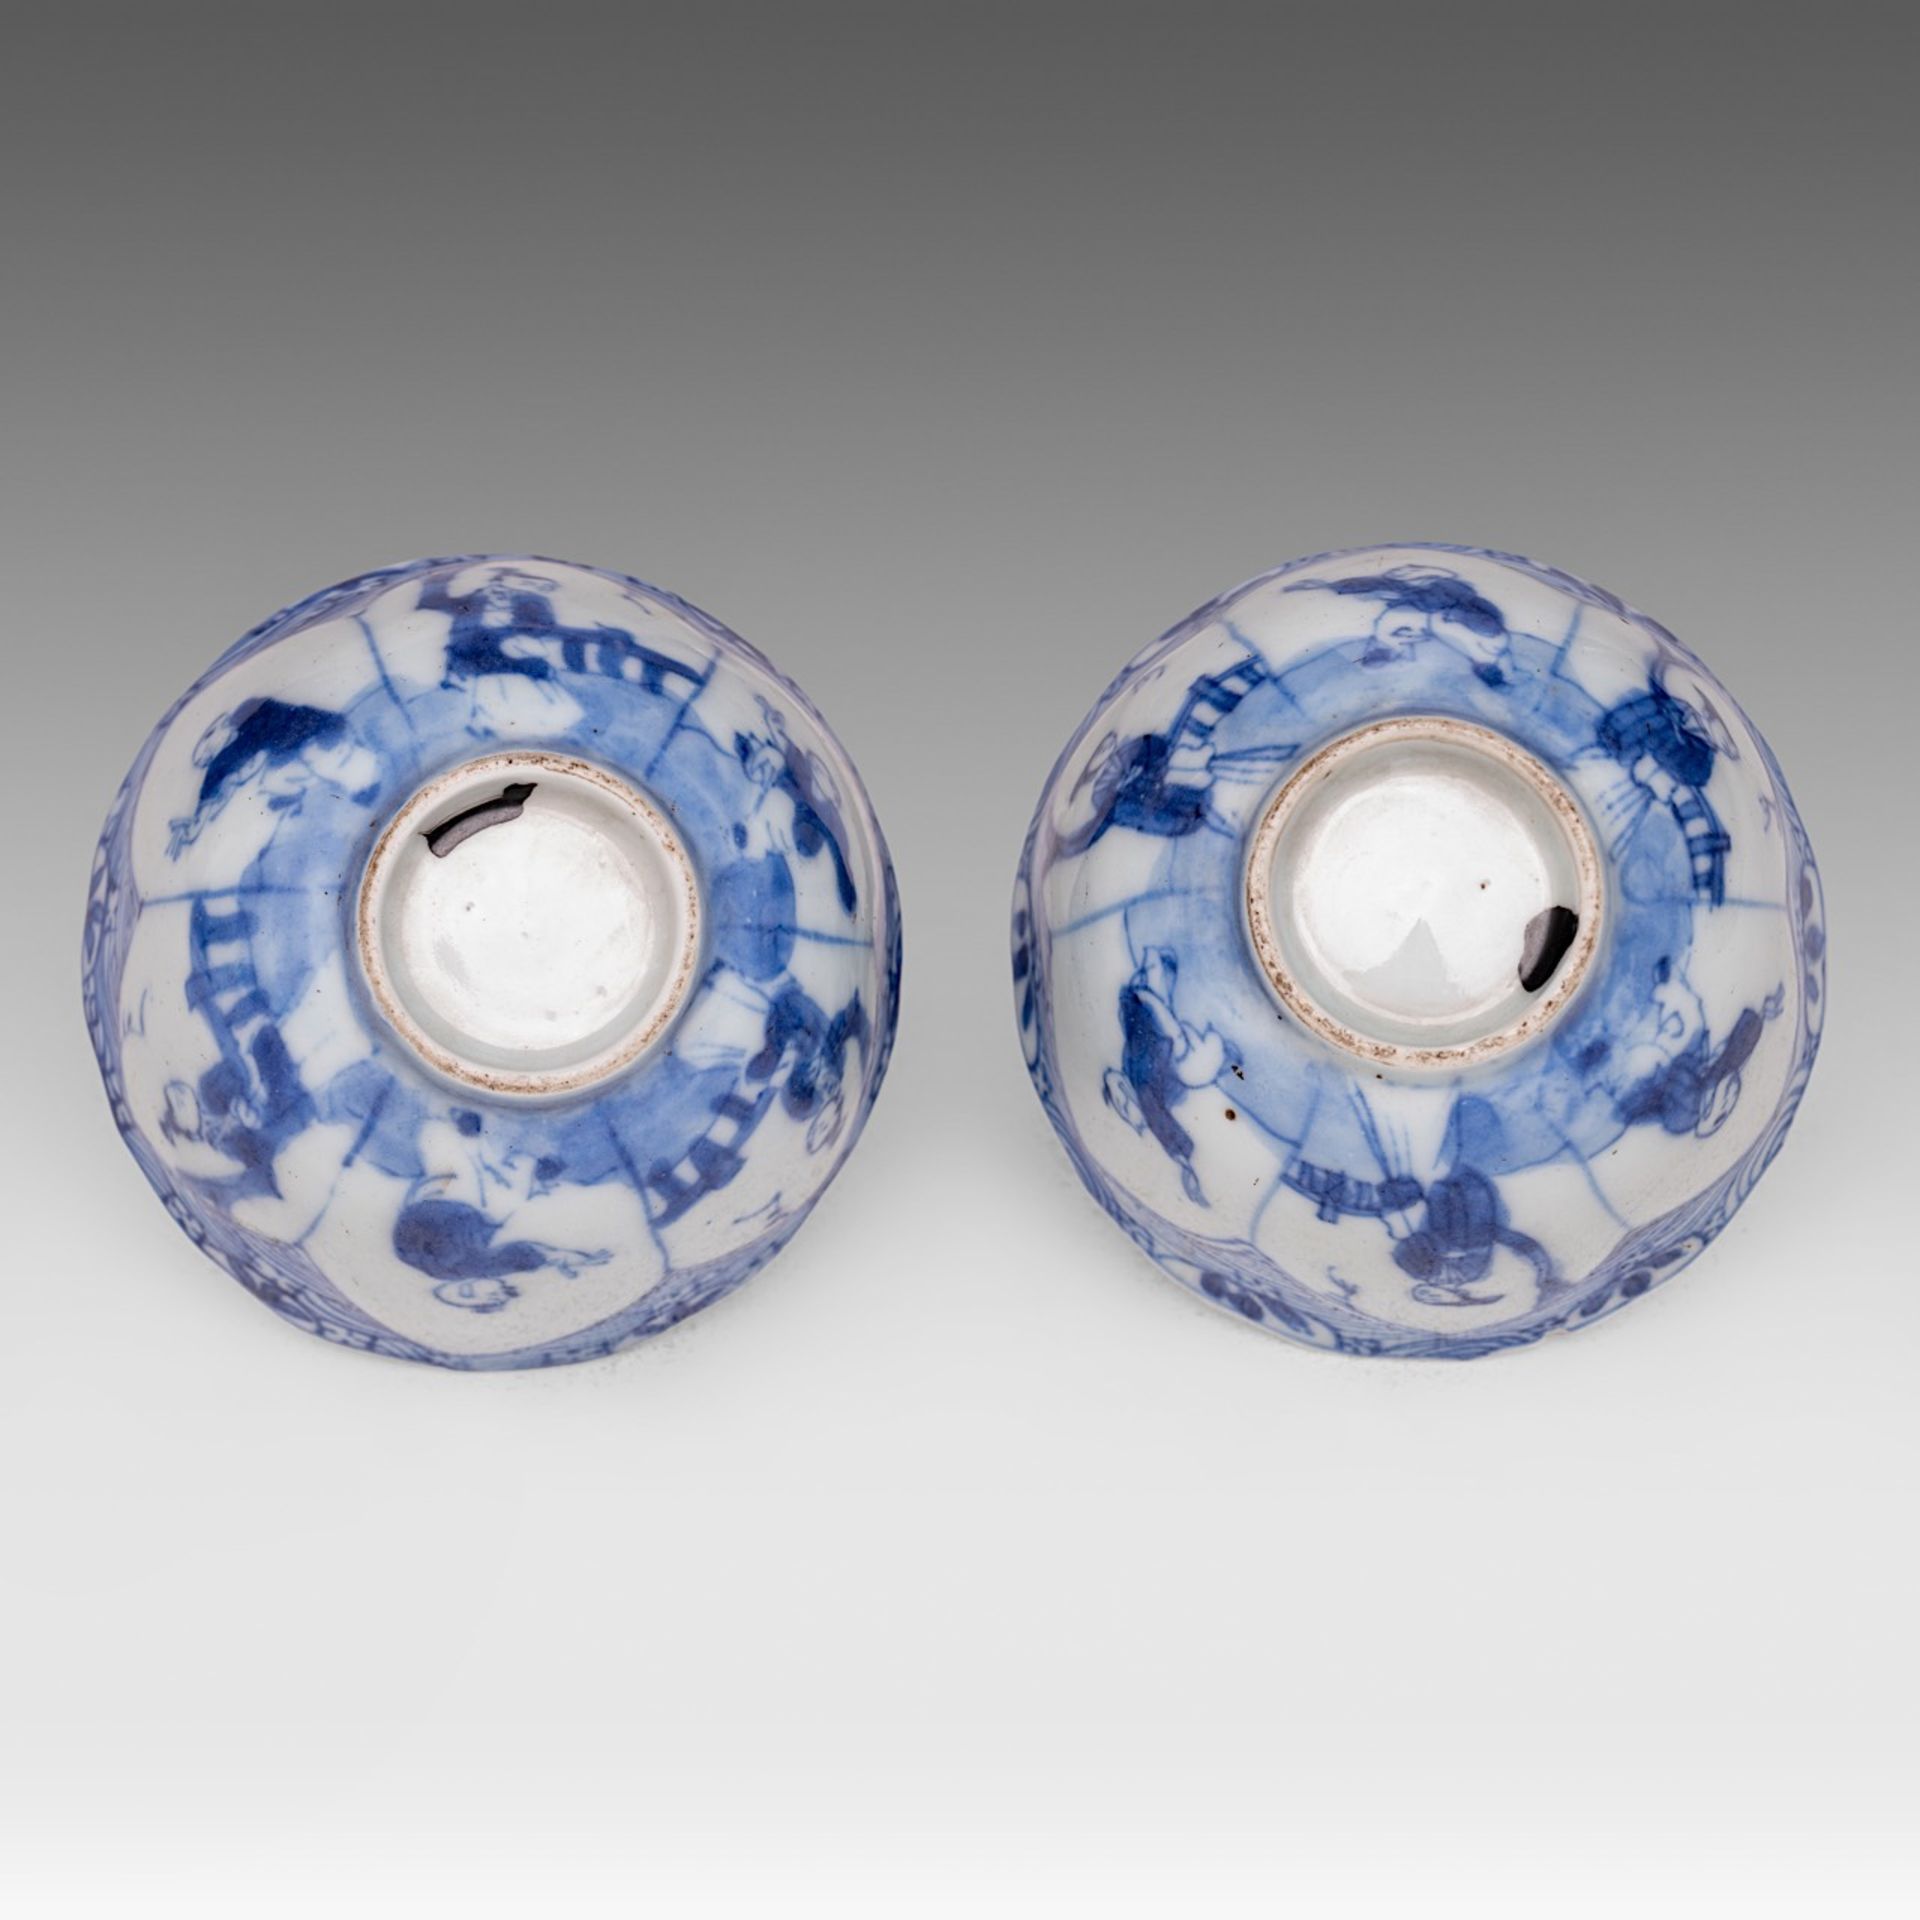 Two Chinese blue and white 'Long Elisa' tea cups, Kangxi period, H - dia cm - Image 6 of 6